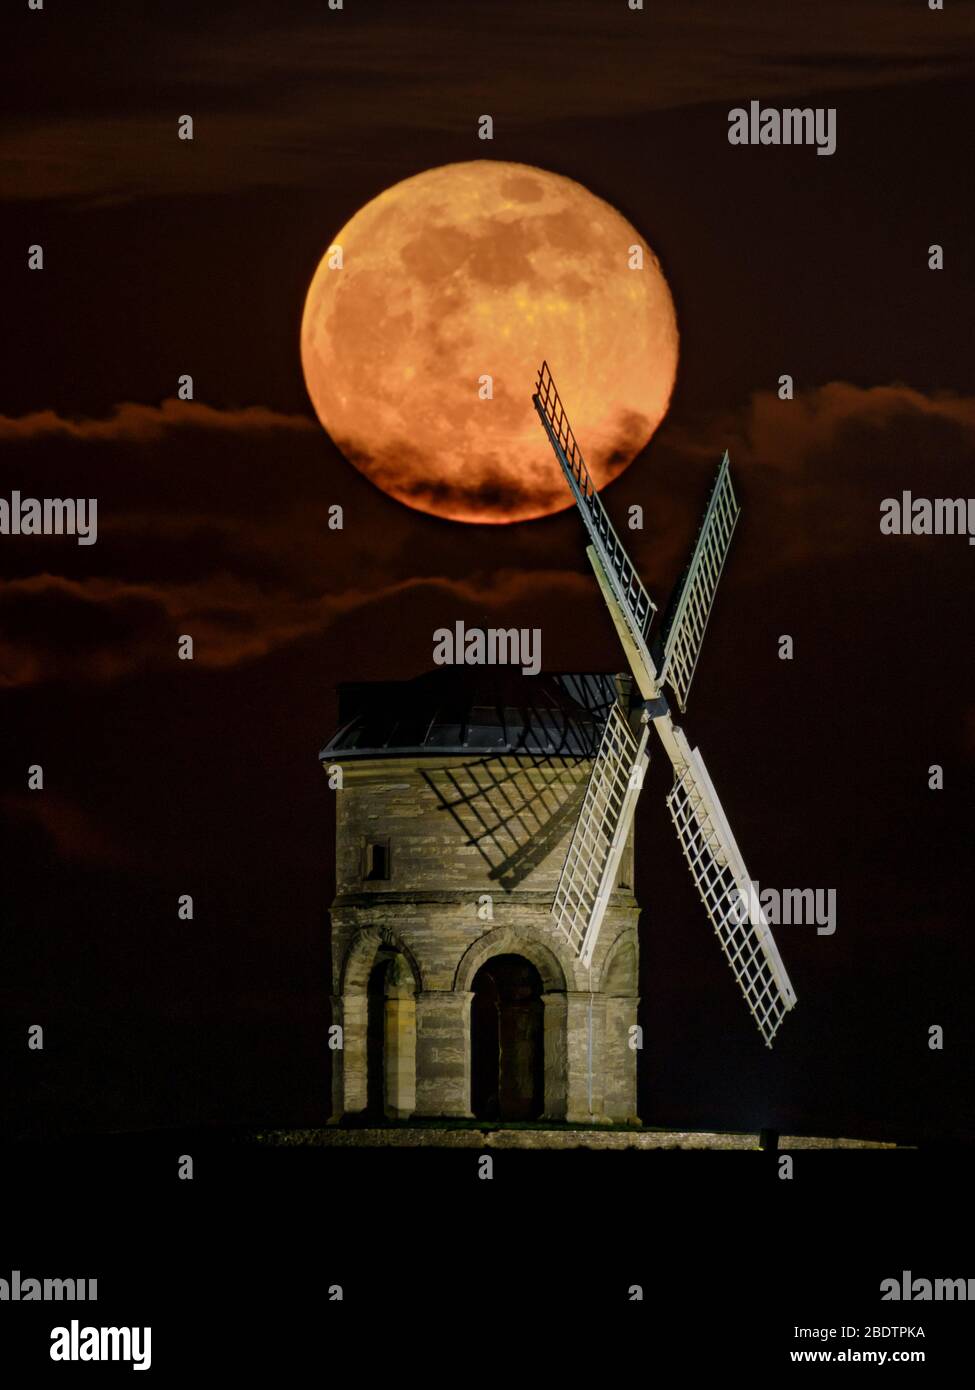 Full moon (supermoon) rising behind Chesterton Windmill, Warwickshire, UK.  Single image (not composite) taken with a long focal length lens. Stock Photo